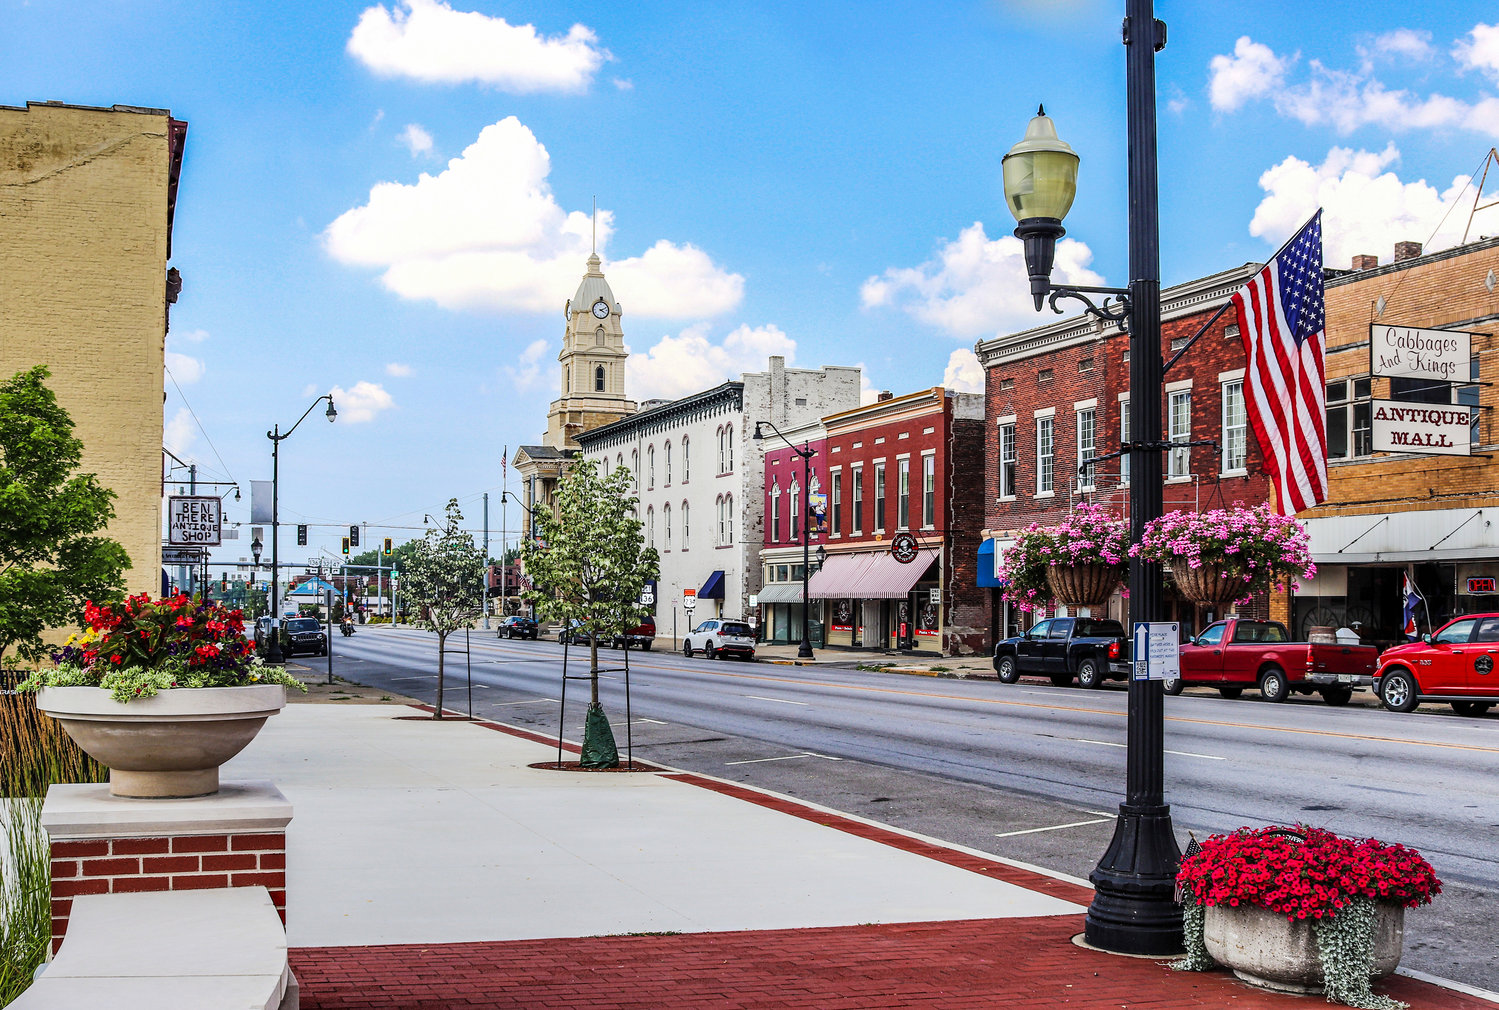 Downtown Crawfordsville as seen in the summer of 2020 looking north along South Washington Street.